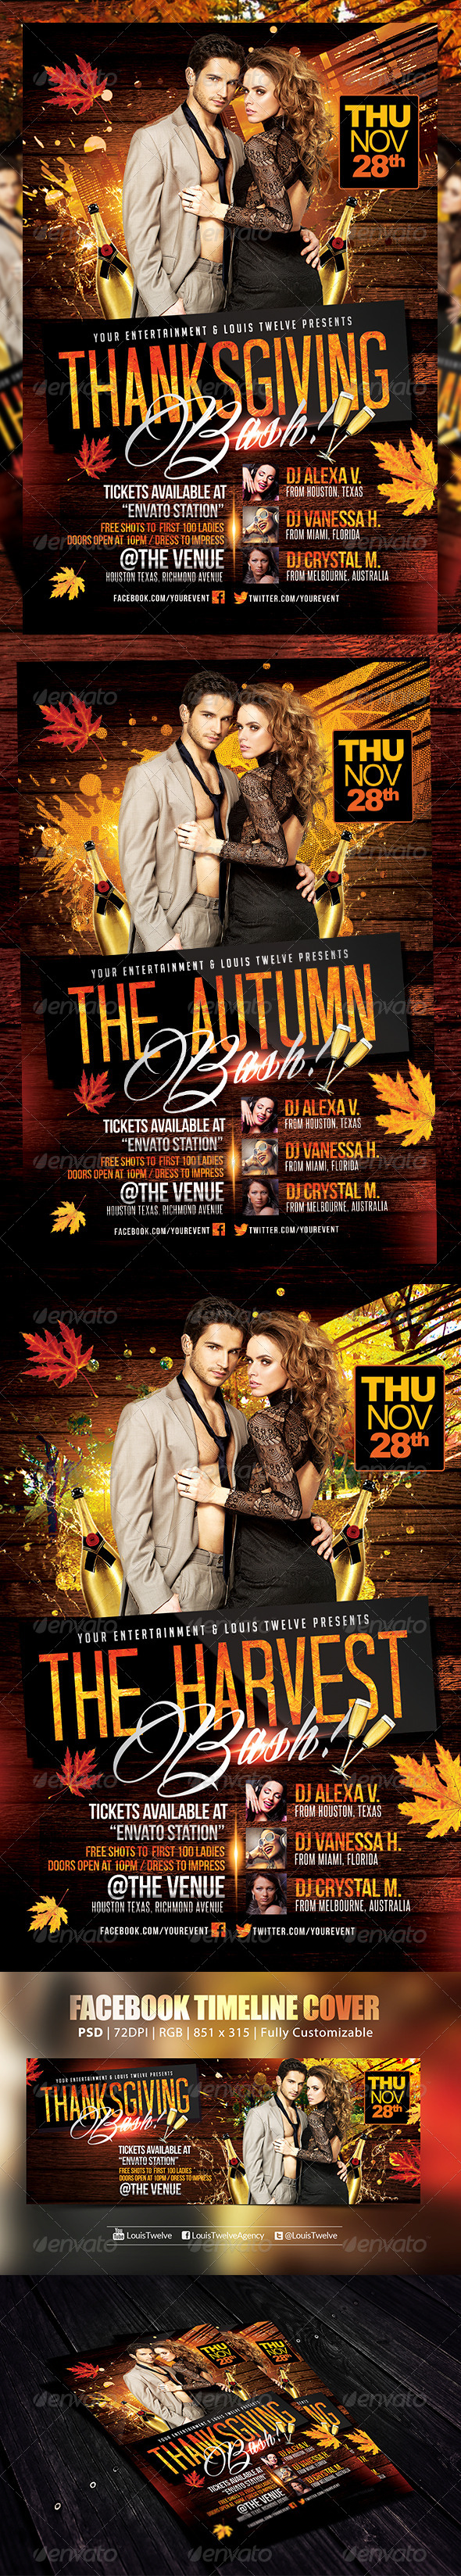 Thanksgiving or Autumn Bash | Flyer + FB Cover